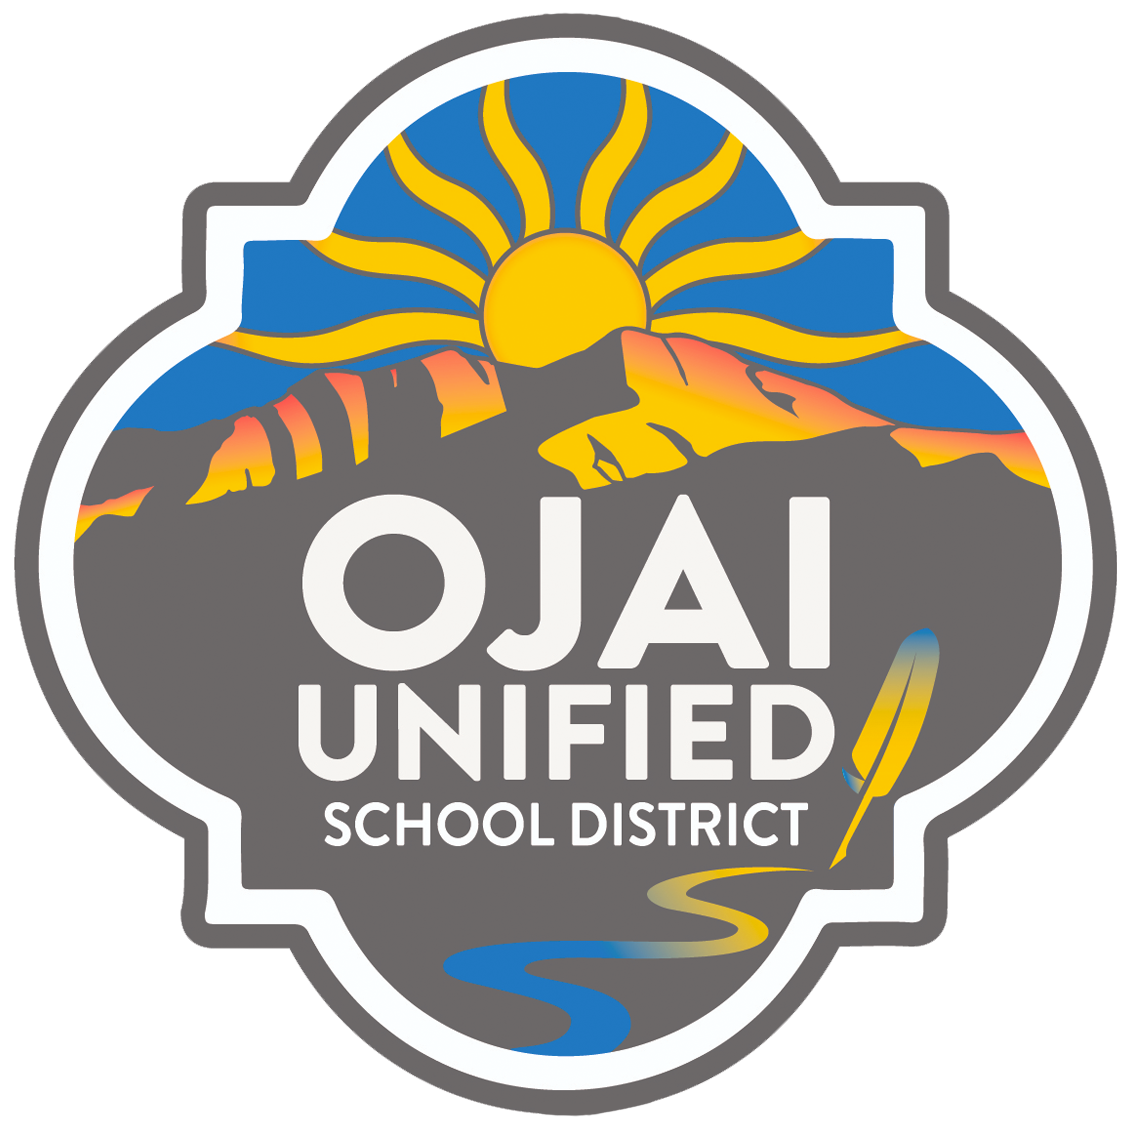 ojaiunified.png